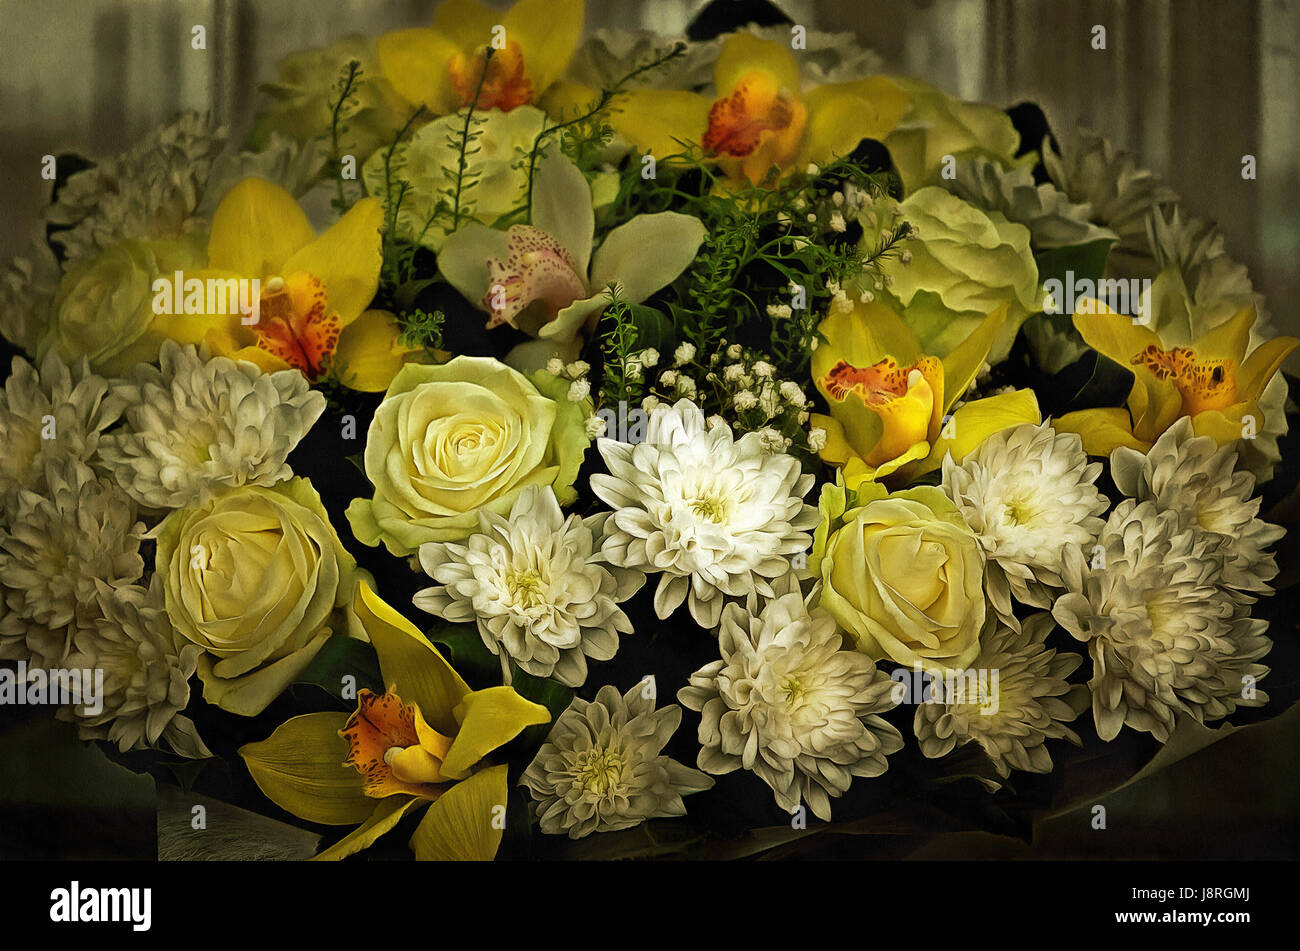 Illustrations flowers bouquet, painting, yellow roses, Rose, (Latin Rosa), Chrysanthemum, orchids Stock Photo